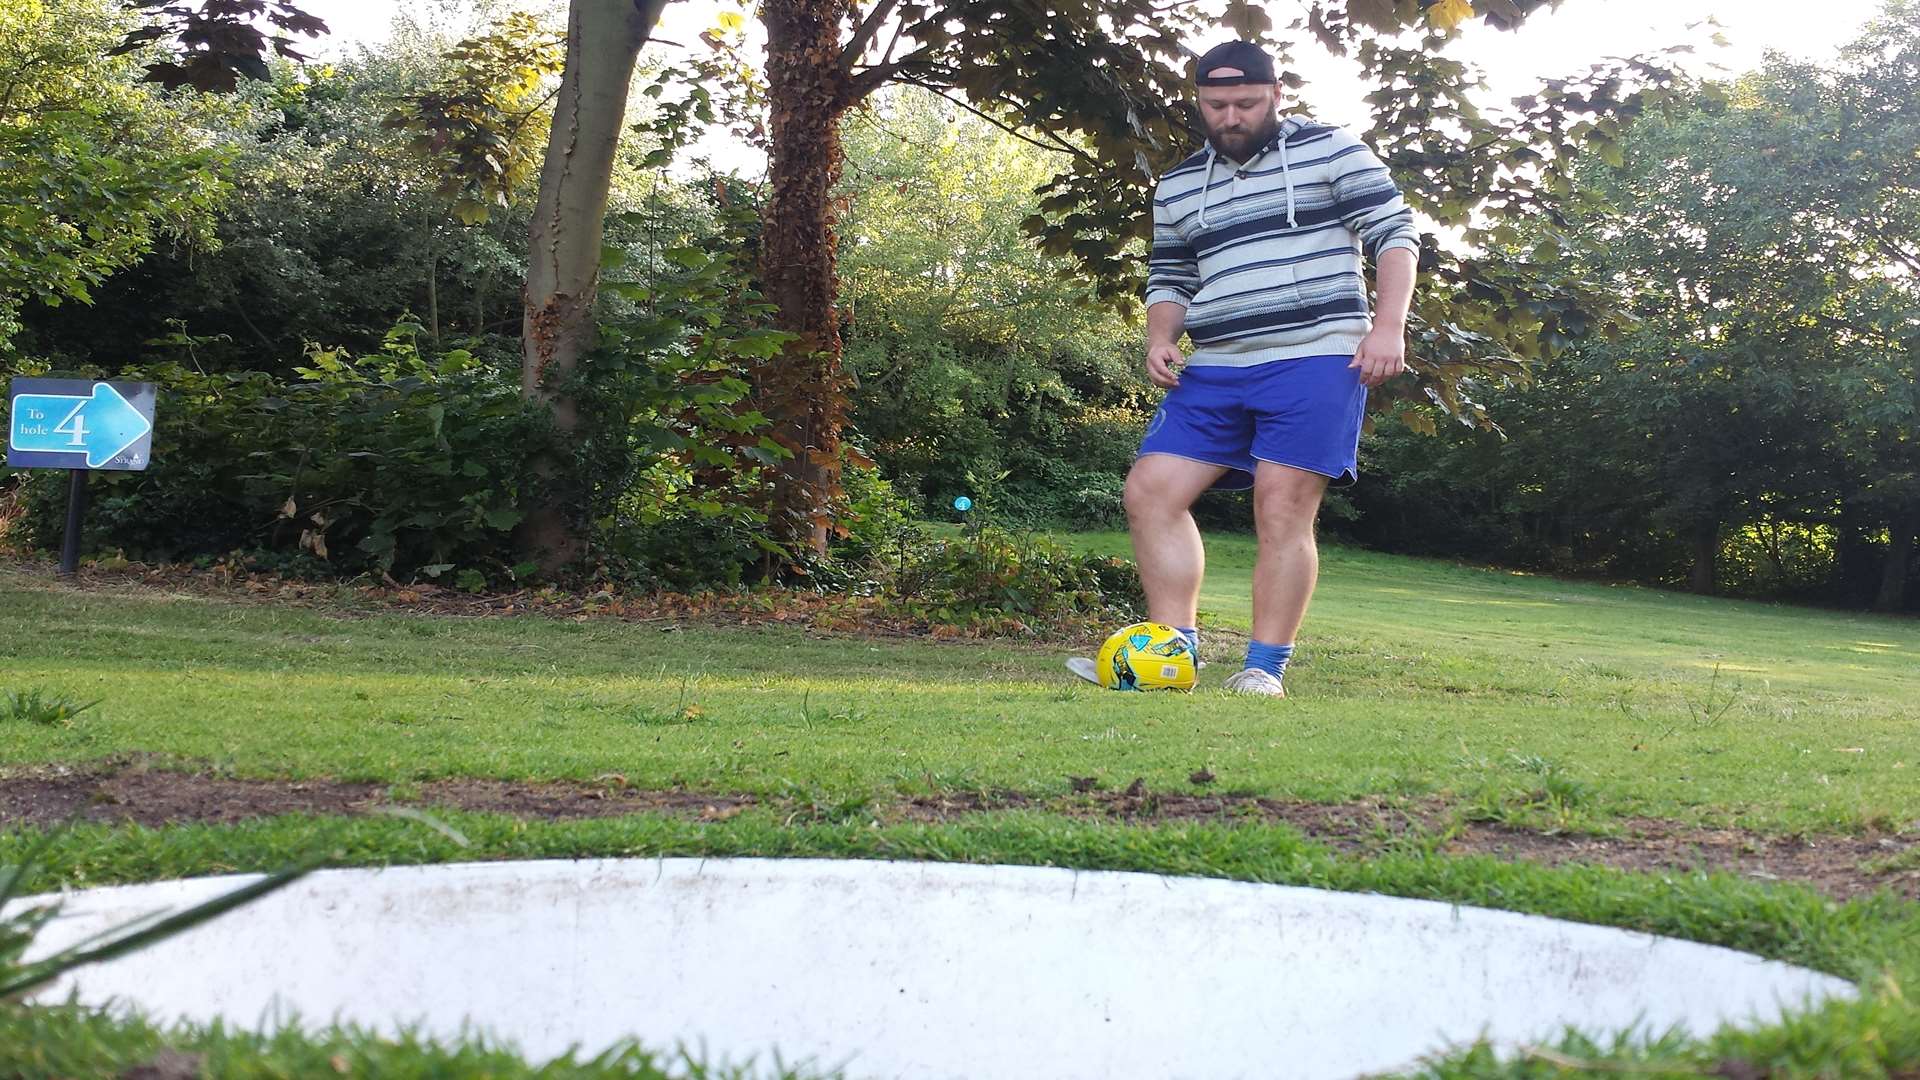 Stephen Emberson from Northfleet lines up a shot on the footgolf course at the Strand in Gillingham